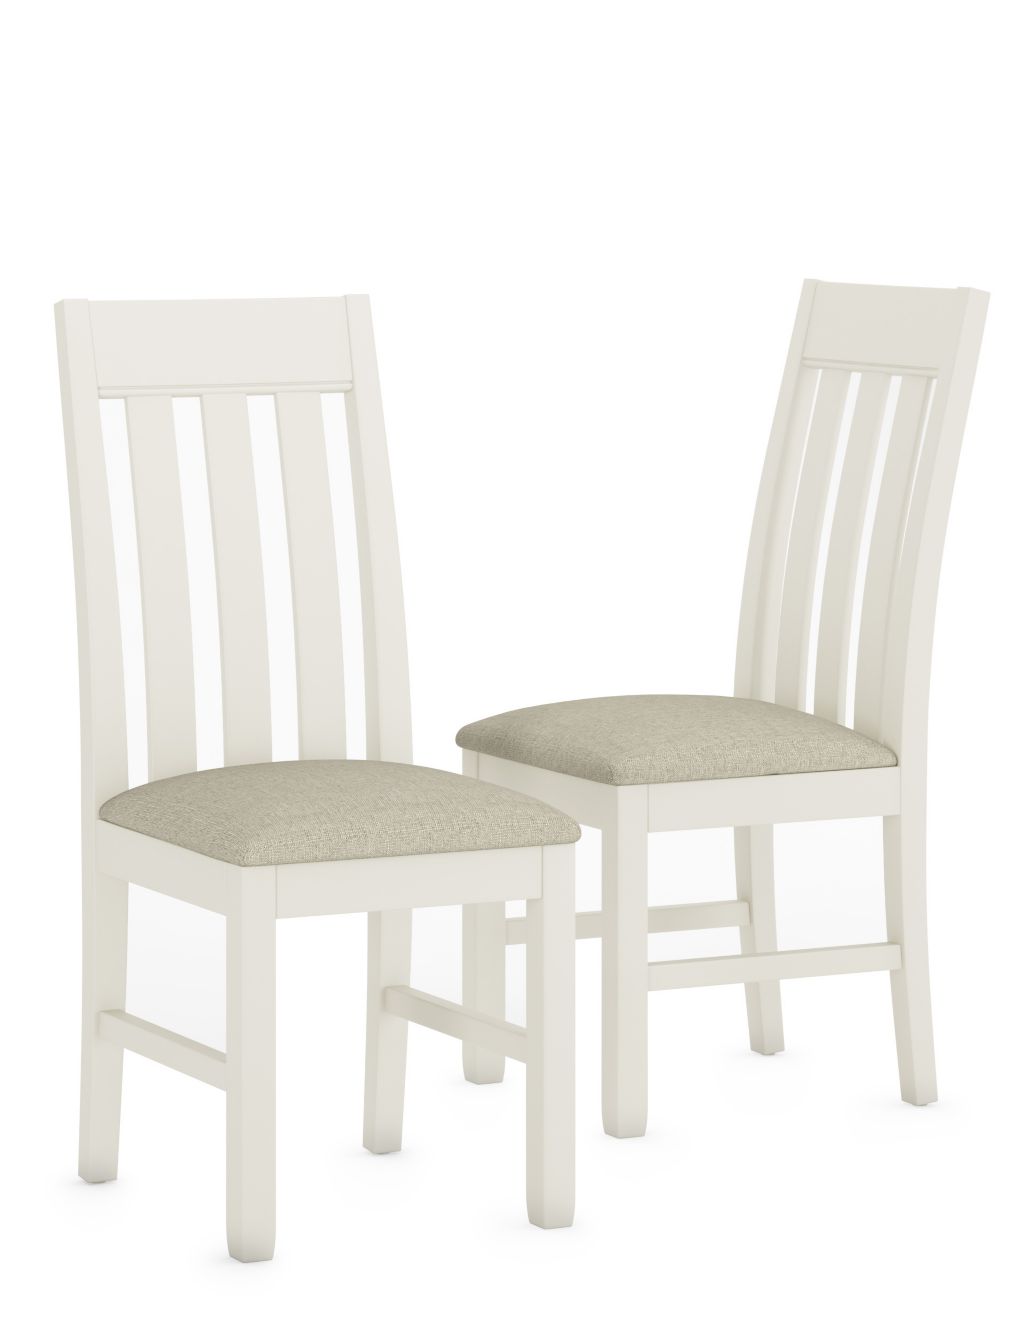 Set of 2 Padstow Padded Dining Chairs image 2